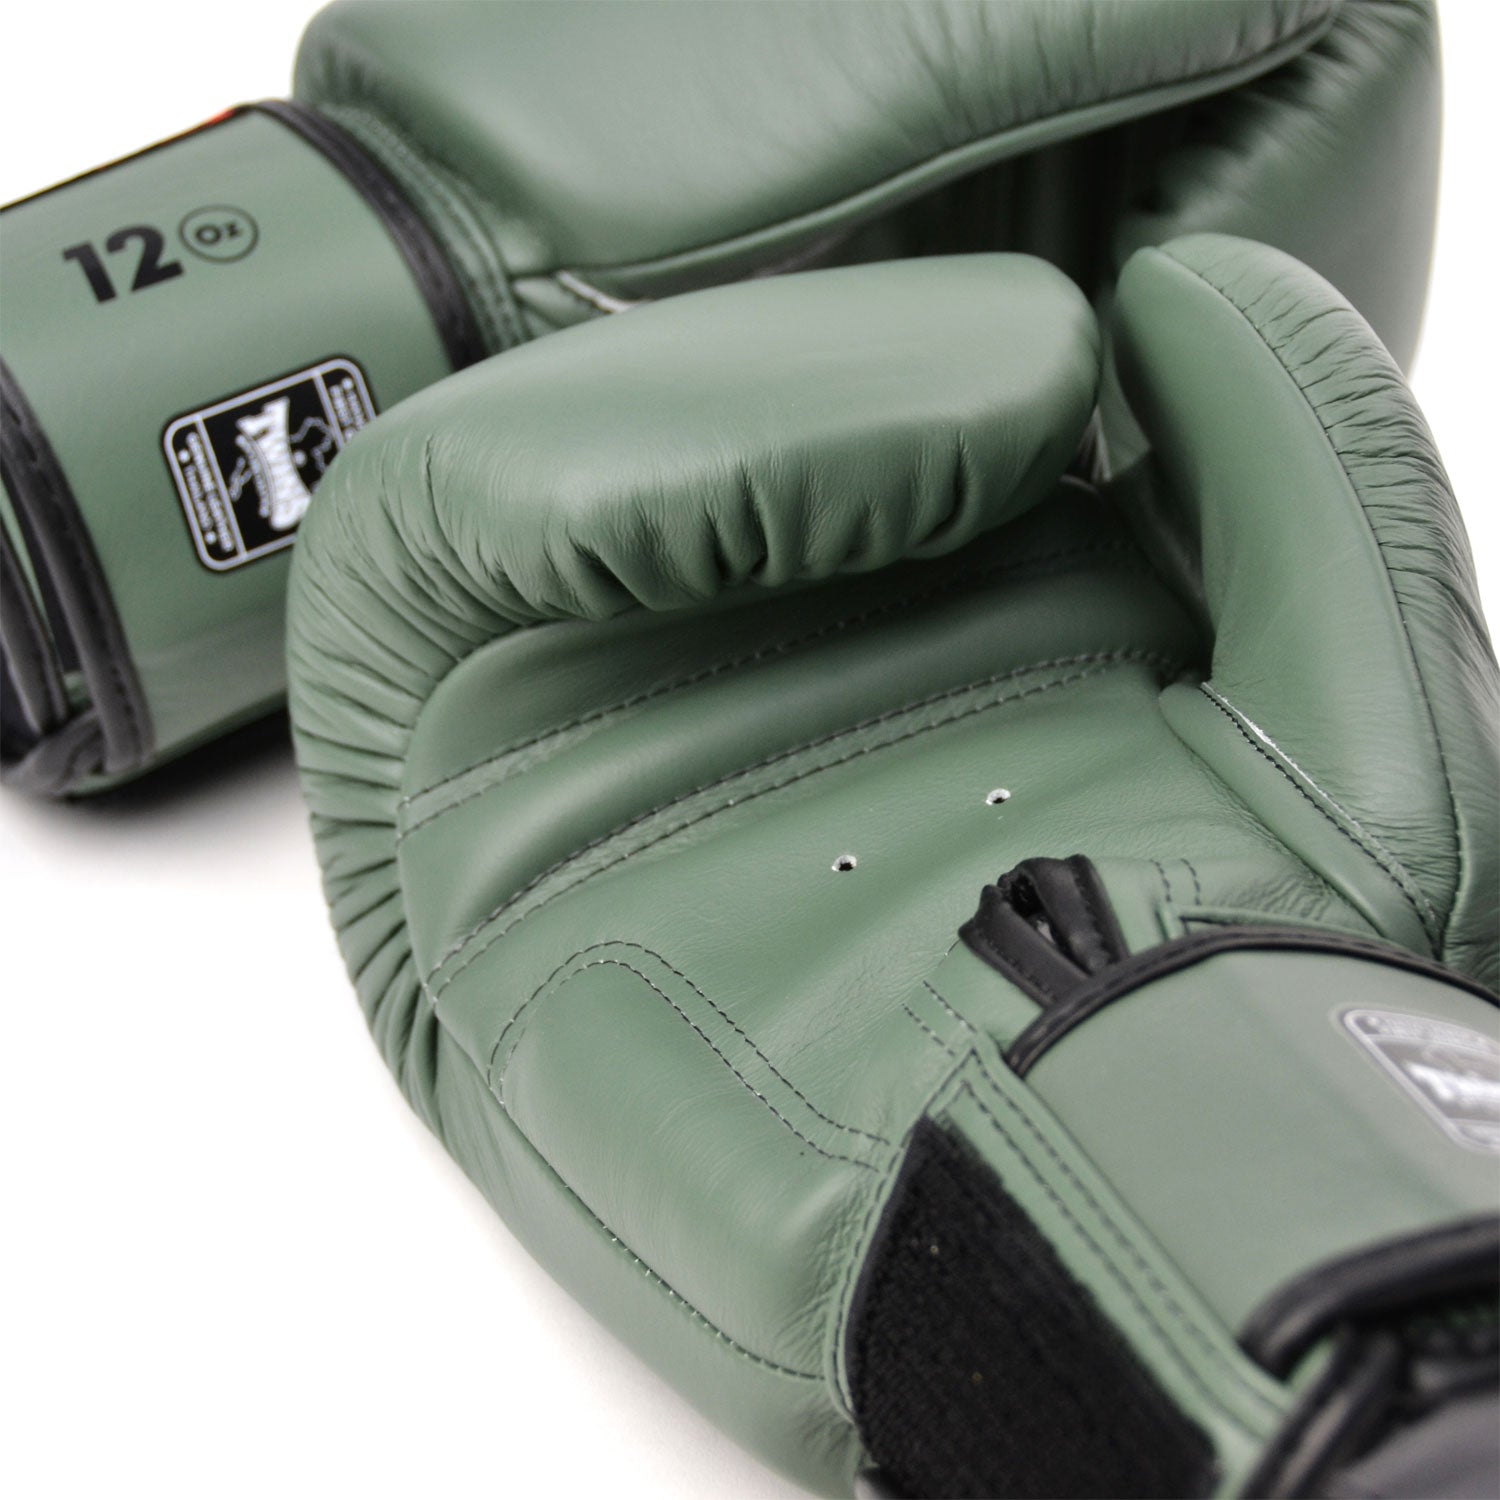 BGVL3 Twins Olive Green Boxing Gloves